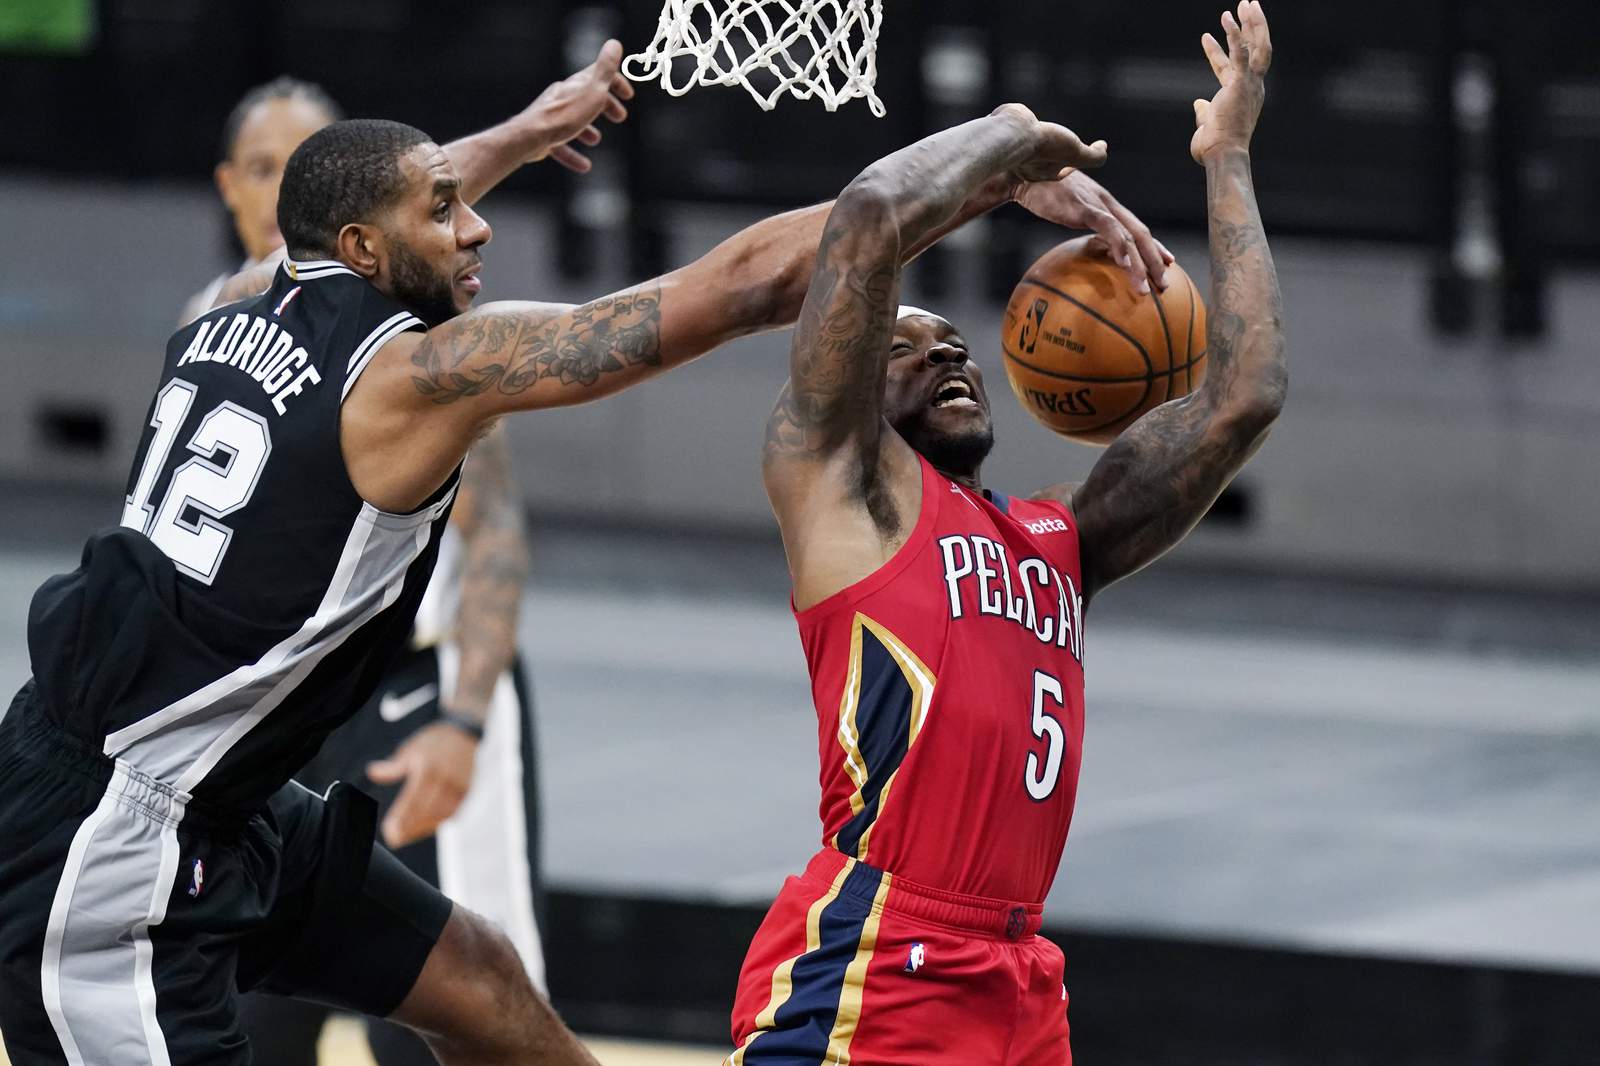 AP source: LaMarcus Aldridge to sign with Brooklyn Nets